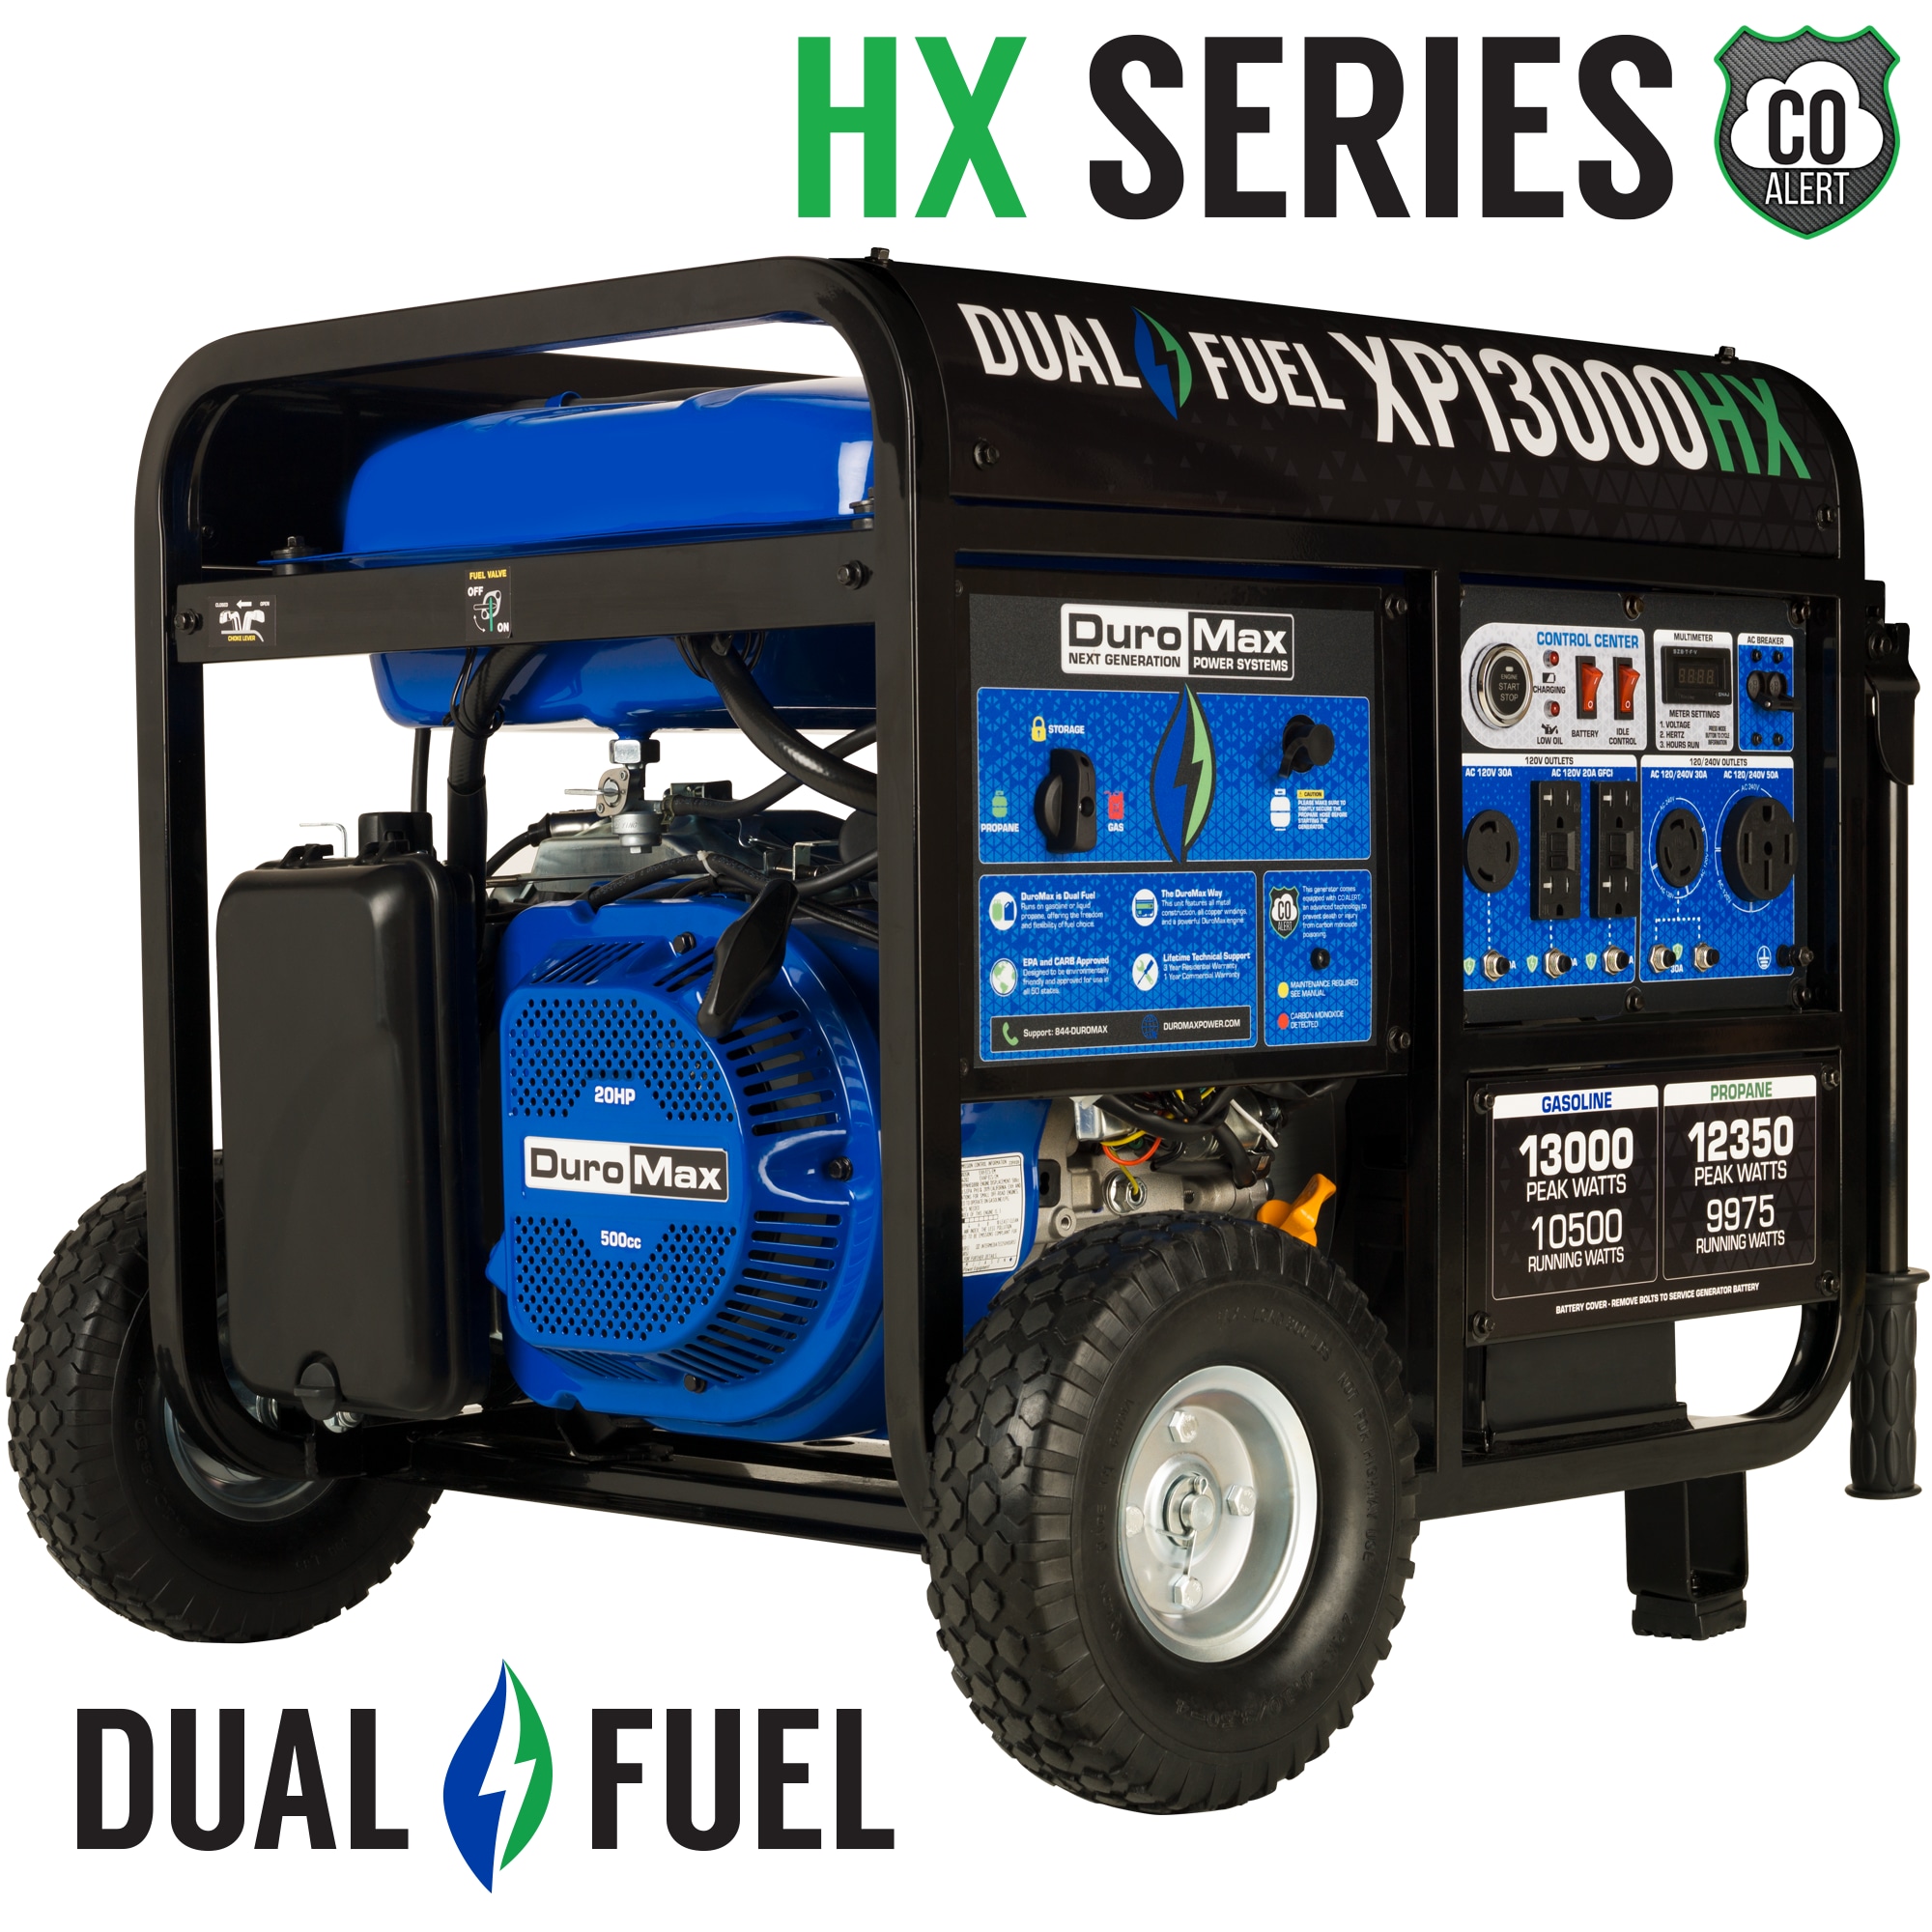 the at Start department Portable 10500-Watt Generator Electric Back DuroMax 500cc Portable Generators Up Home in Power HX